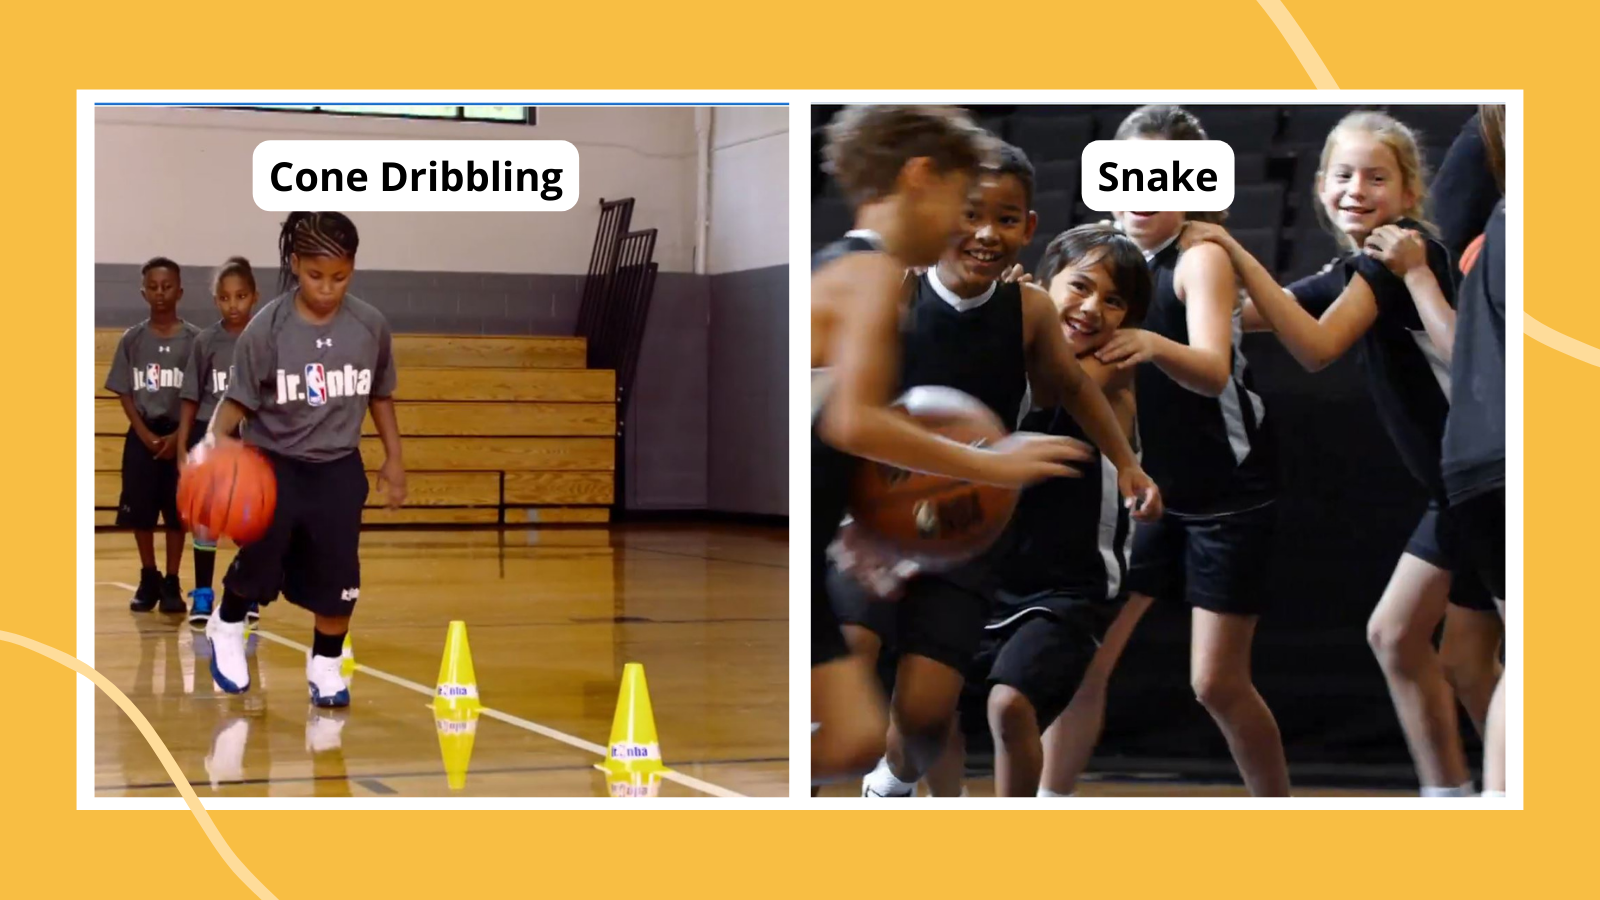 Examples of basketball drills for kids including a group of kids holding on to each other's shoulders to play Snake and a girl dribbling a basketball around cones in a gym.